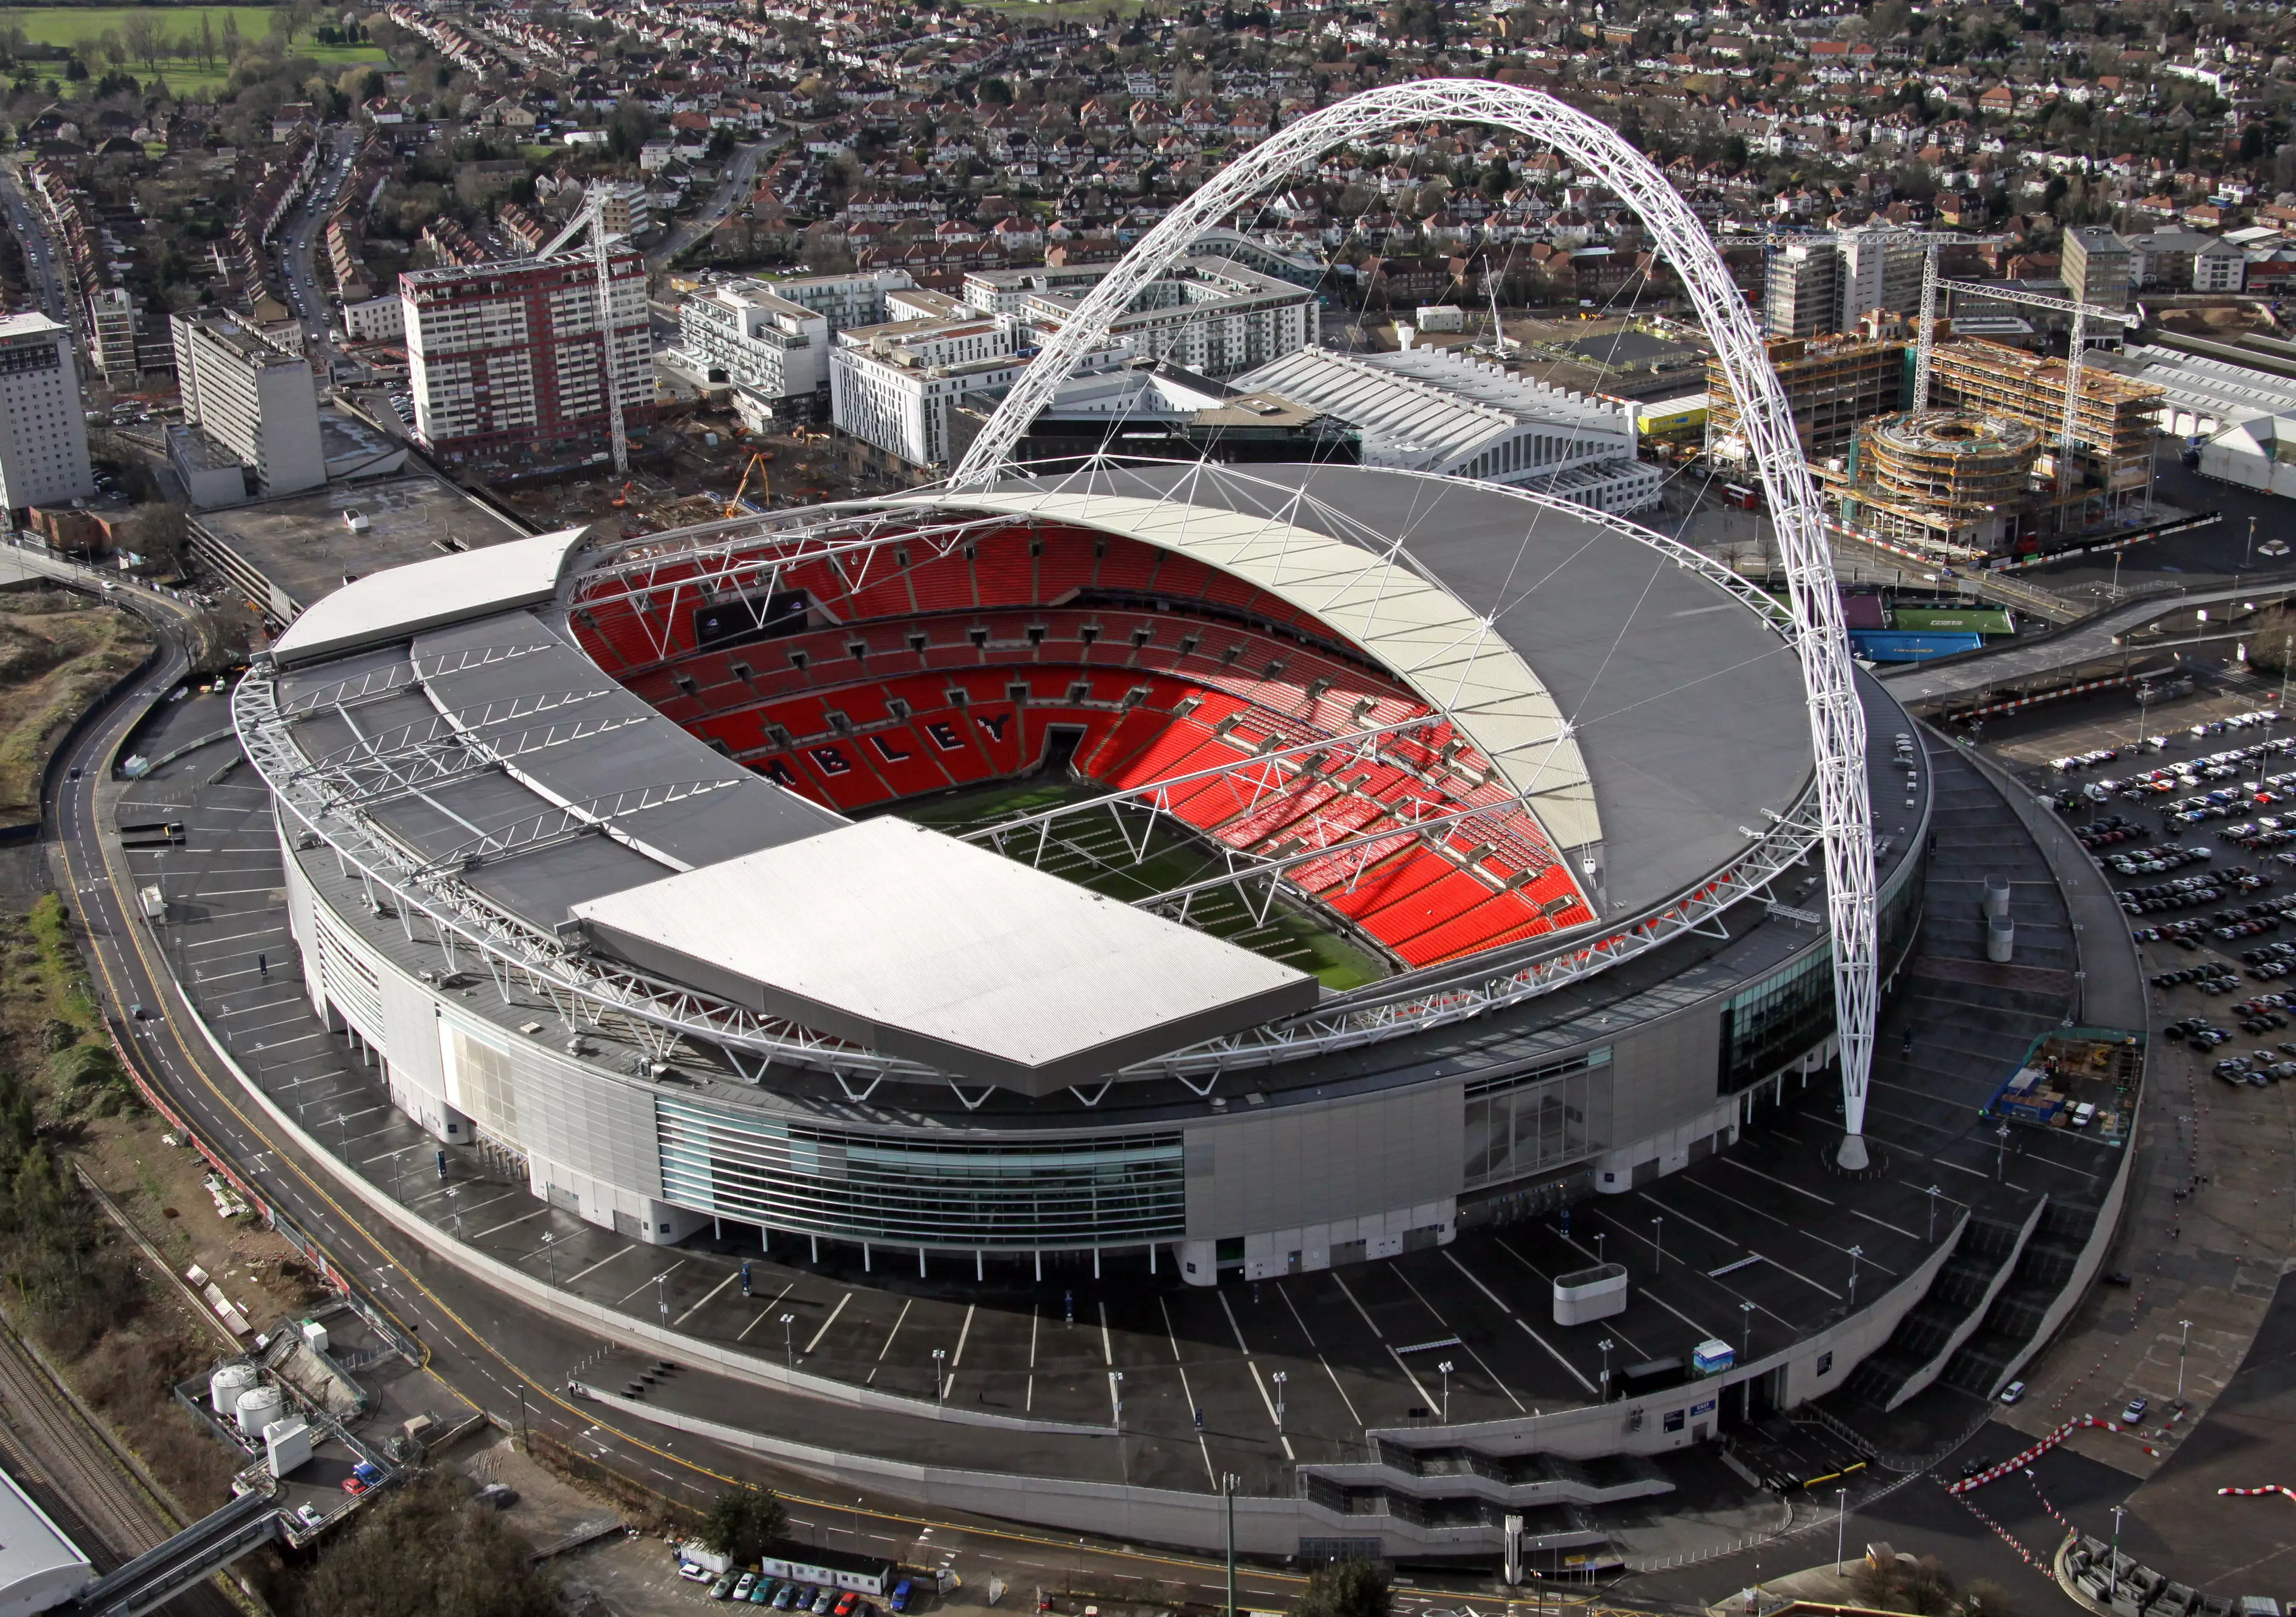 England has submitted a joint bid to host Euro 2028 with Scotland, Wales, Northern Ireland and the Republic of Ireland (Image: PA)